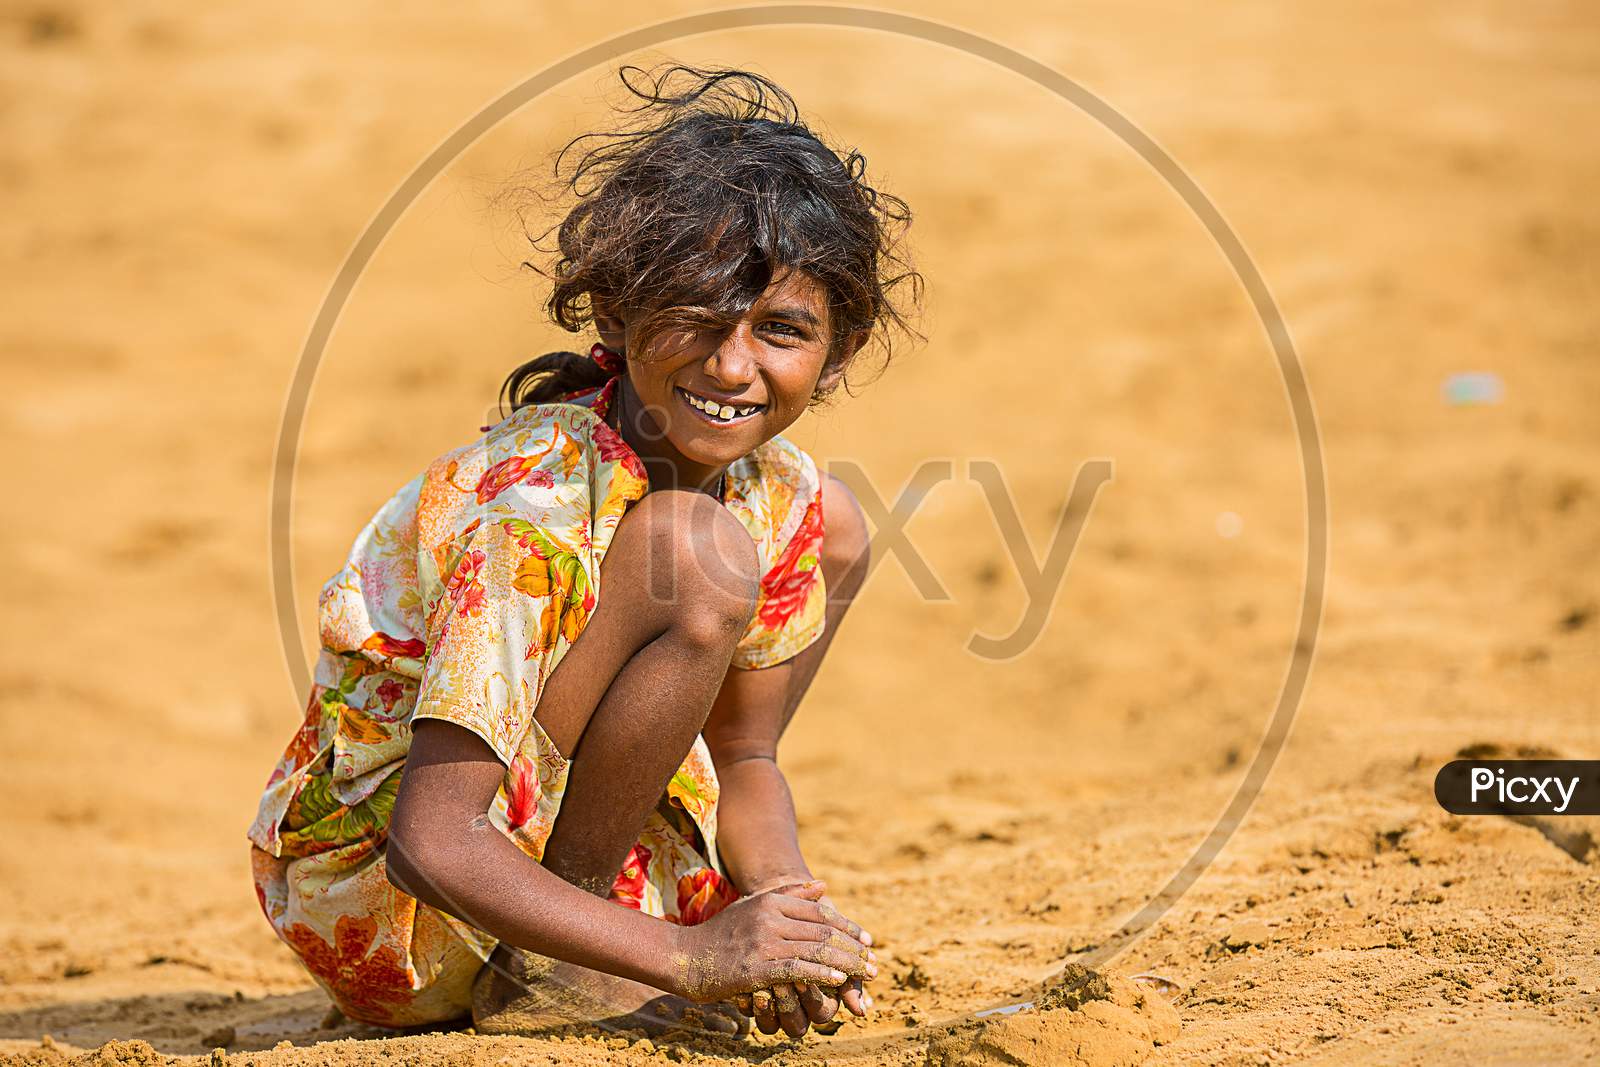 Jodhpur, Rajasthan, India - June 18Th, 2019: Poor Rural Girl Playing With Sand In Hot Summer, Smiling Towards Camera, Poverty Unprivileged Indian Children.